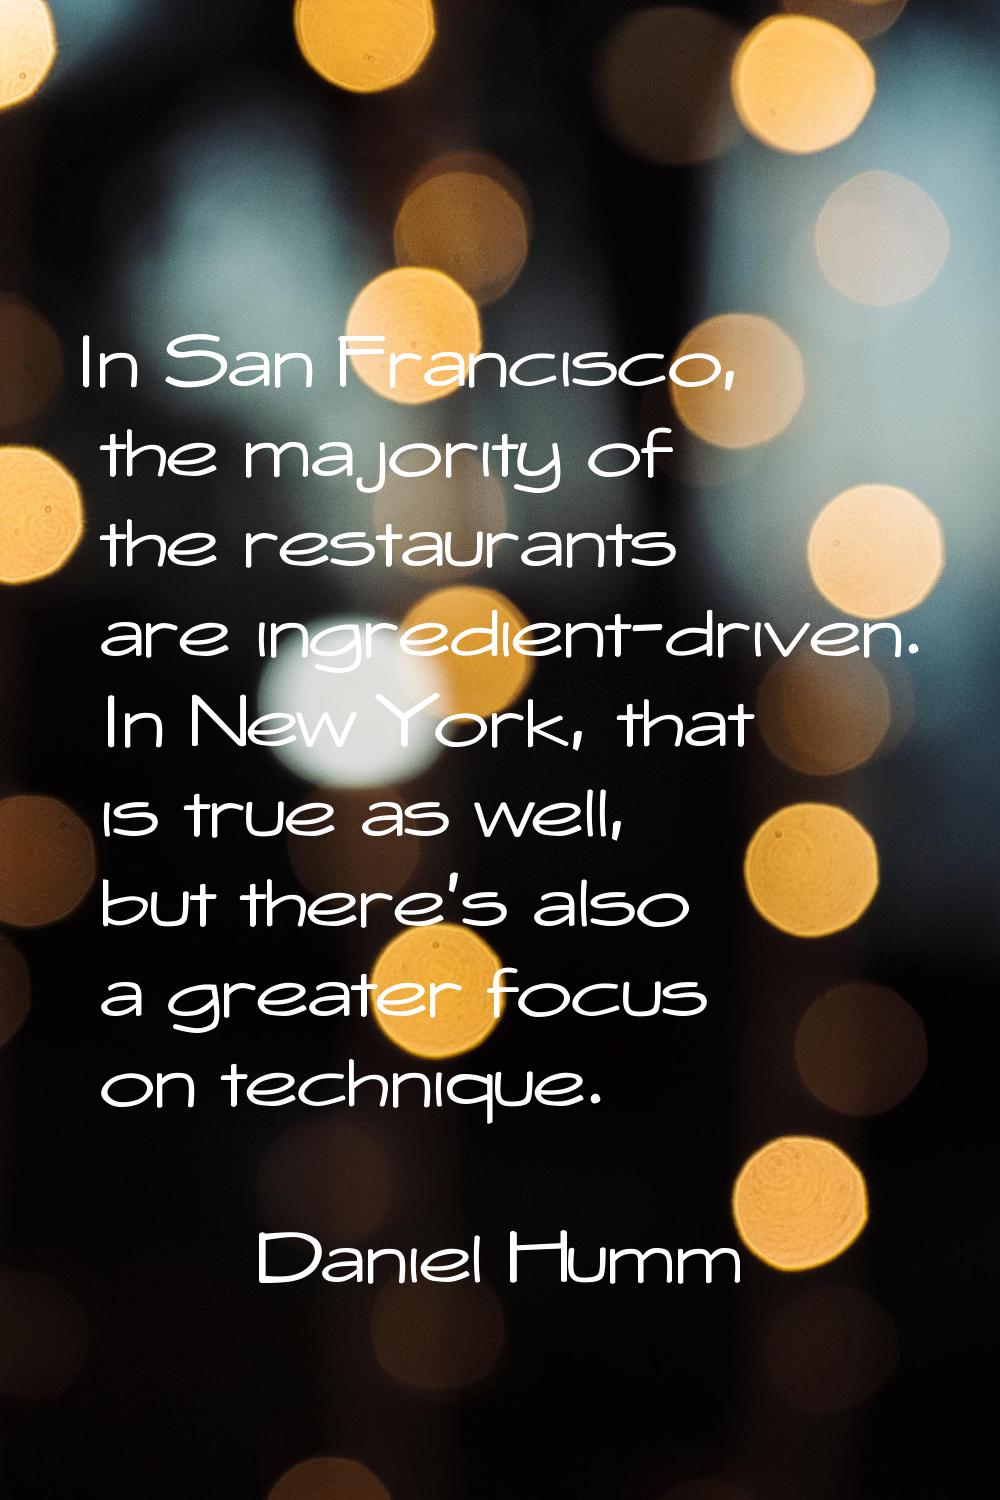 In San Francisco, the majority of the restaurants are ingredient-driven. In New York, that is true 